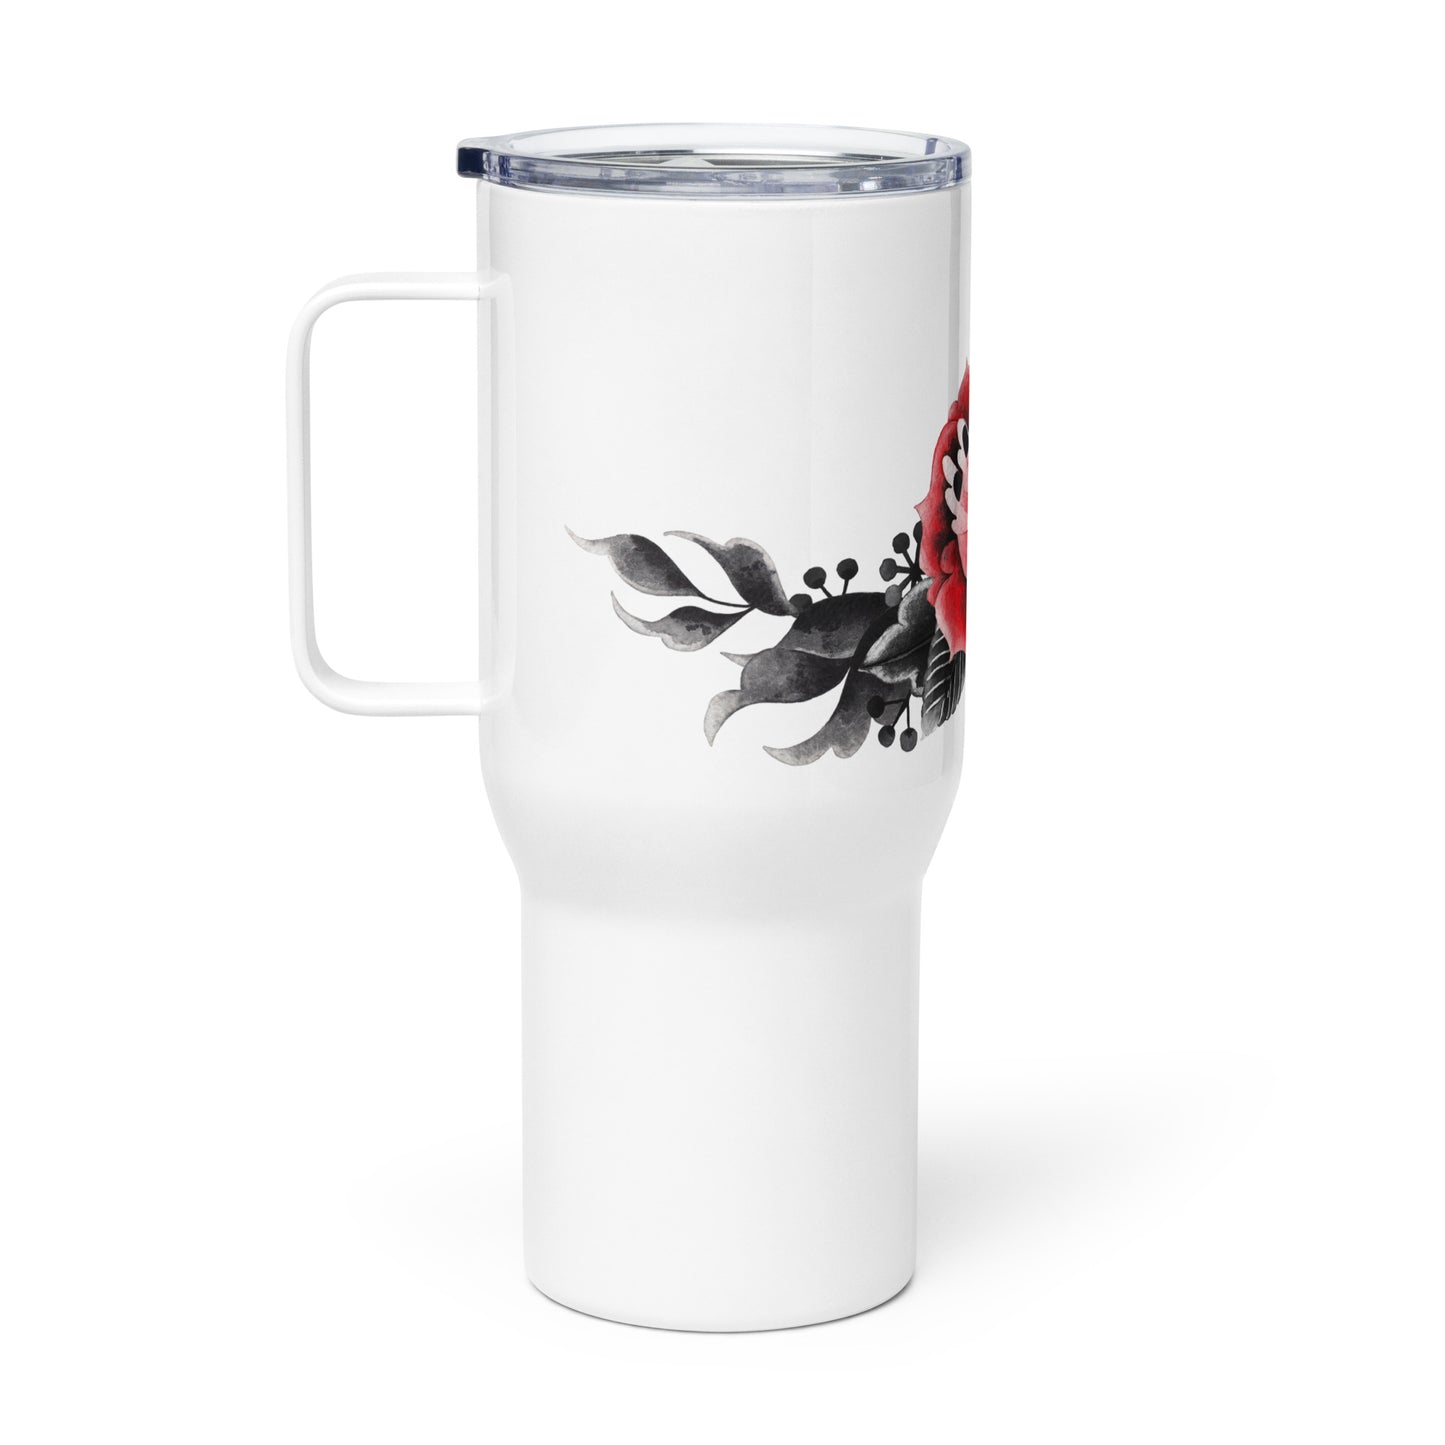 Travel mug with a handle Red & Black Flower